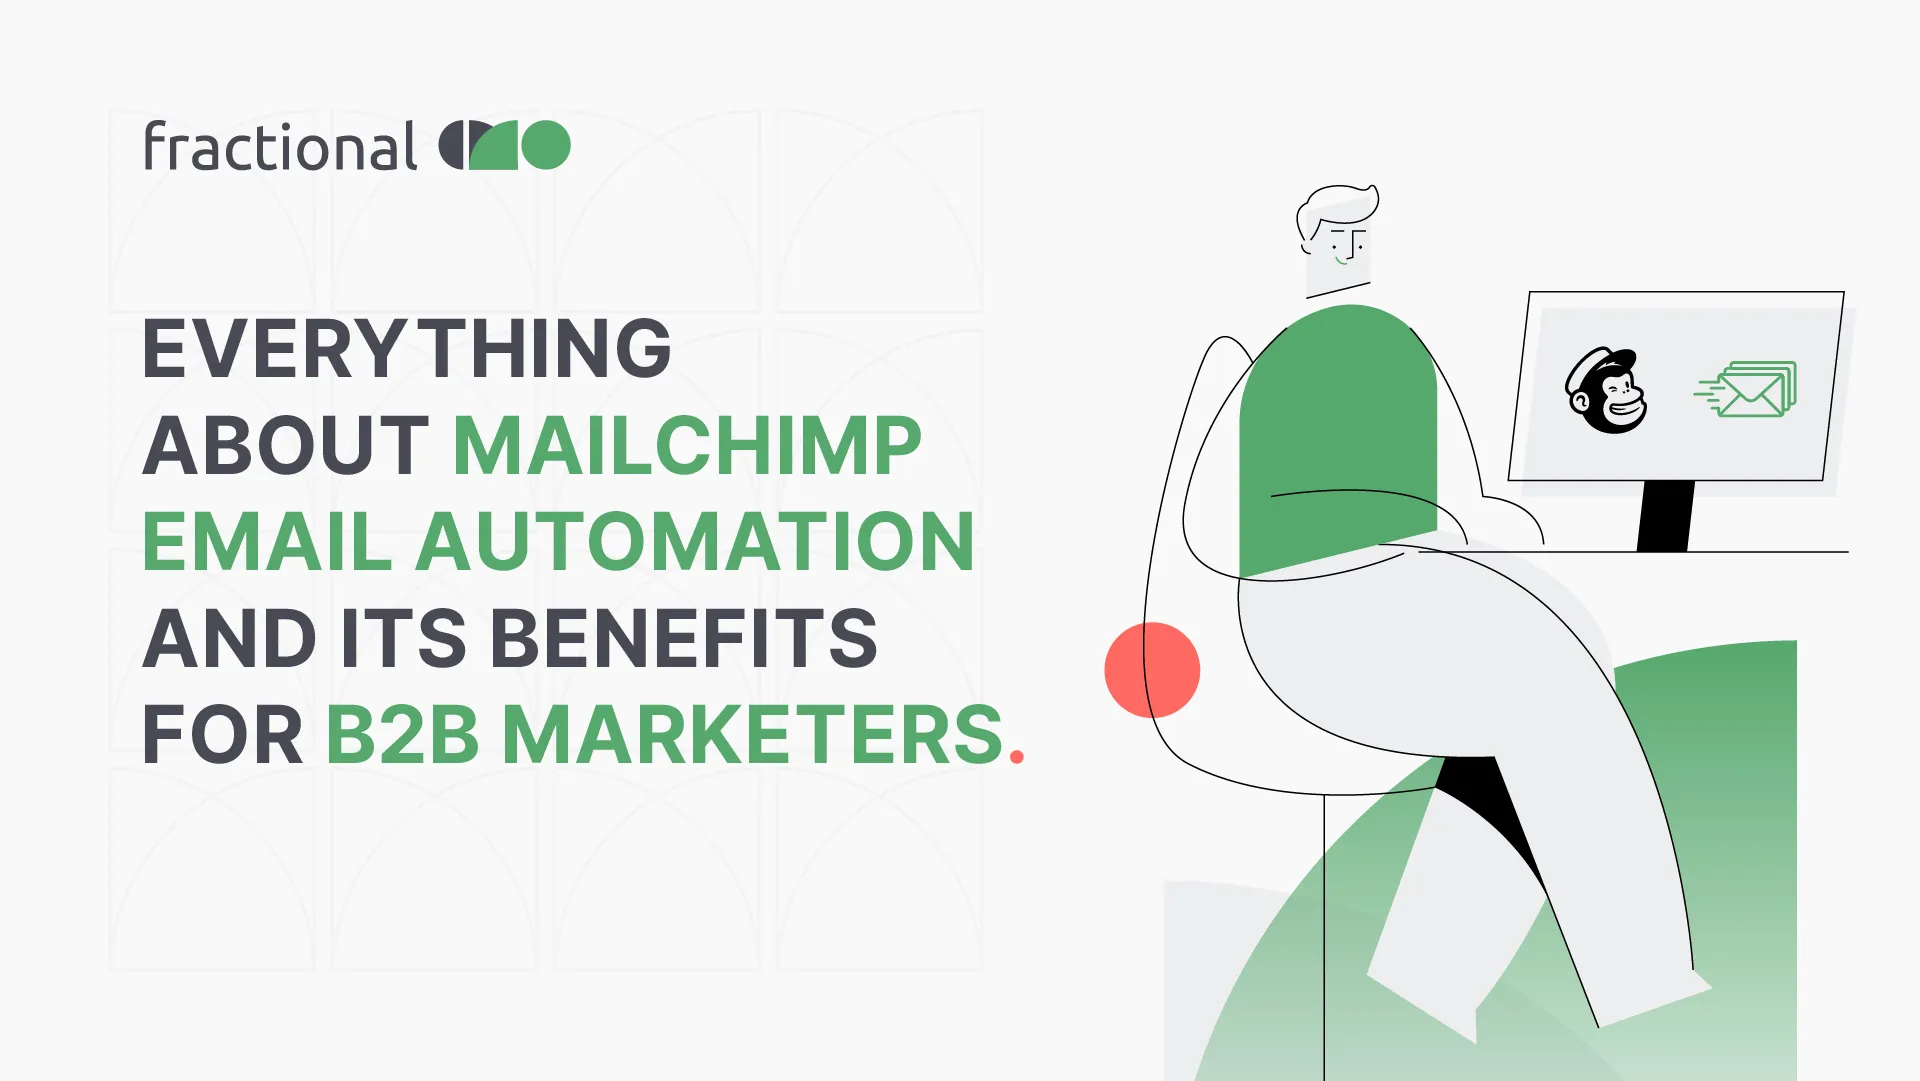 Everything About MailChimp Email Automation and Its Benefits for B2B Marketers